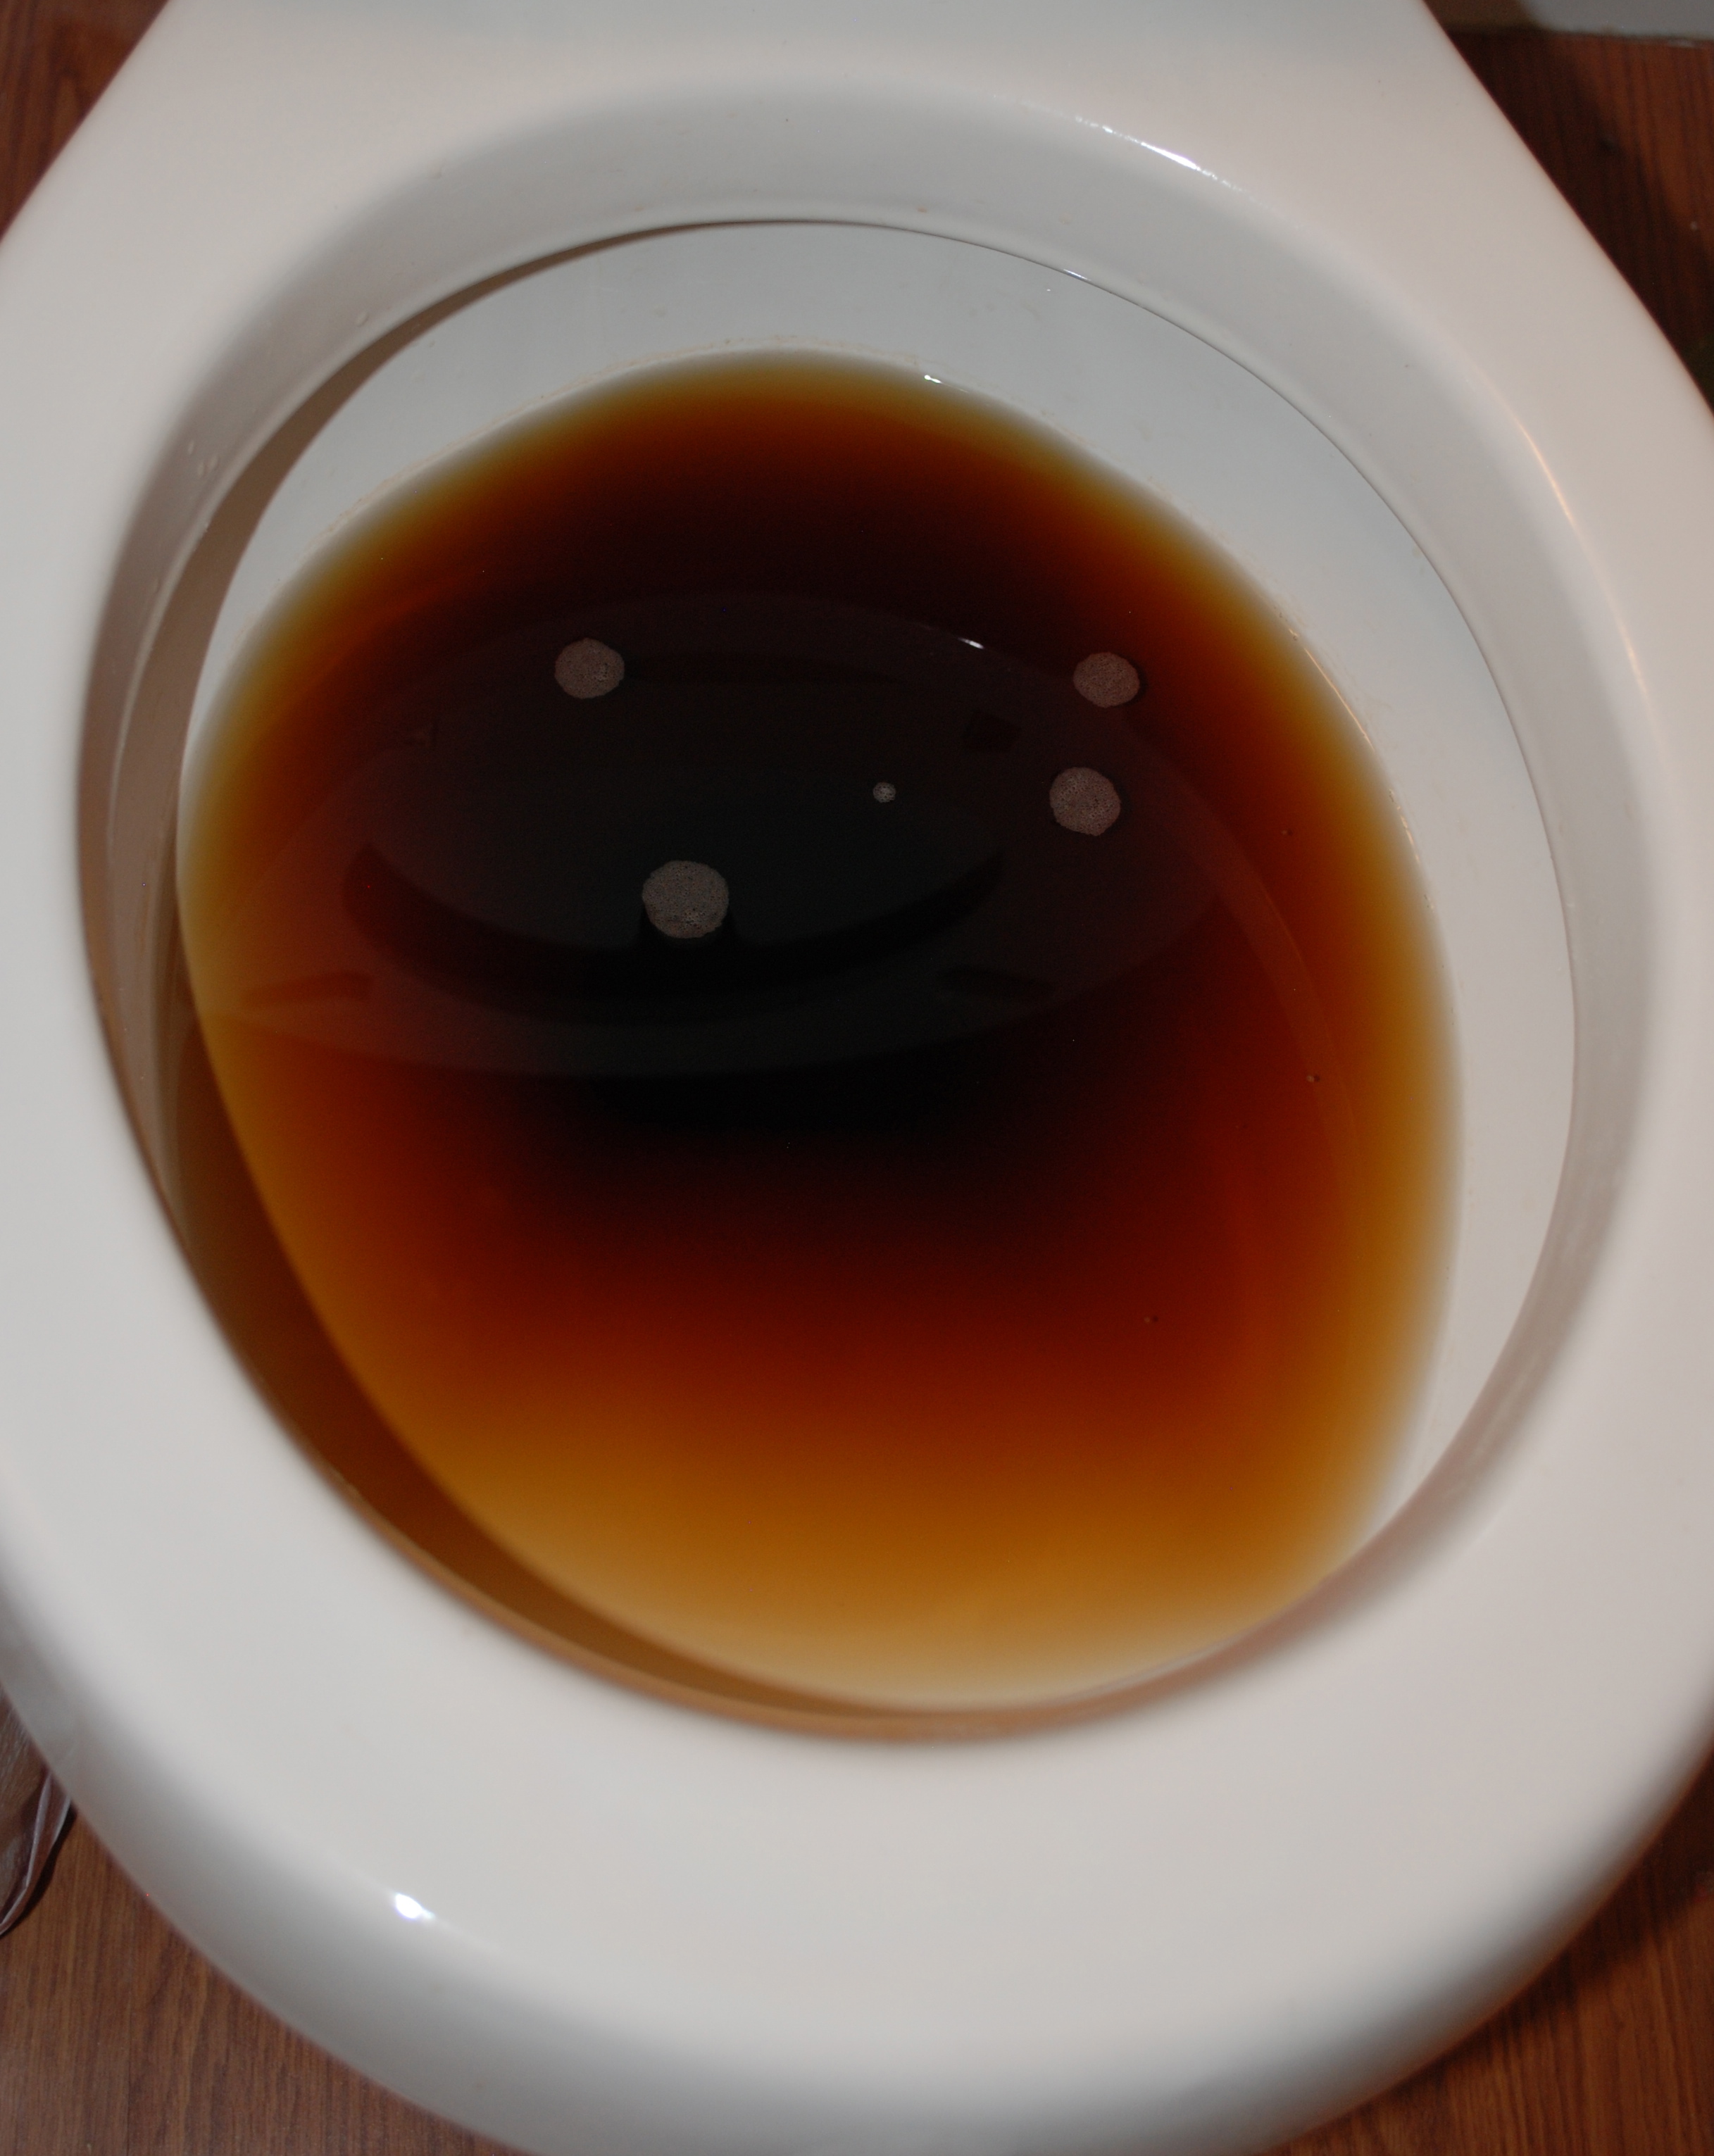 Clean your toilet with Coke?